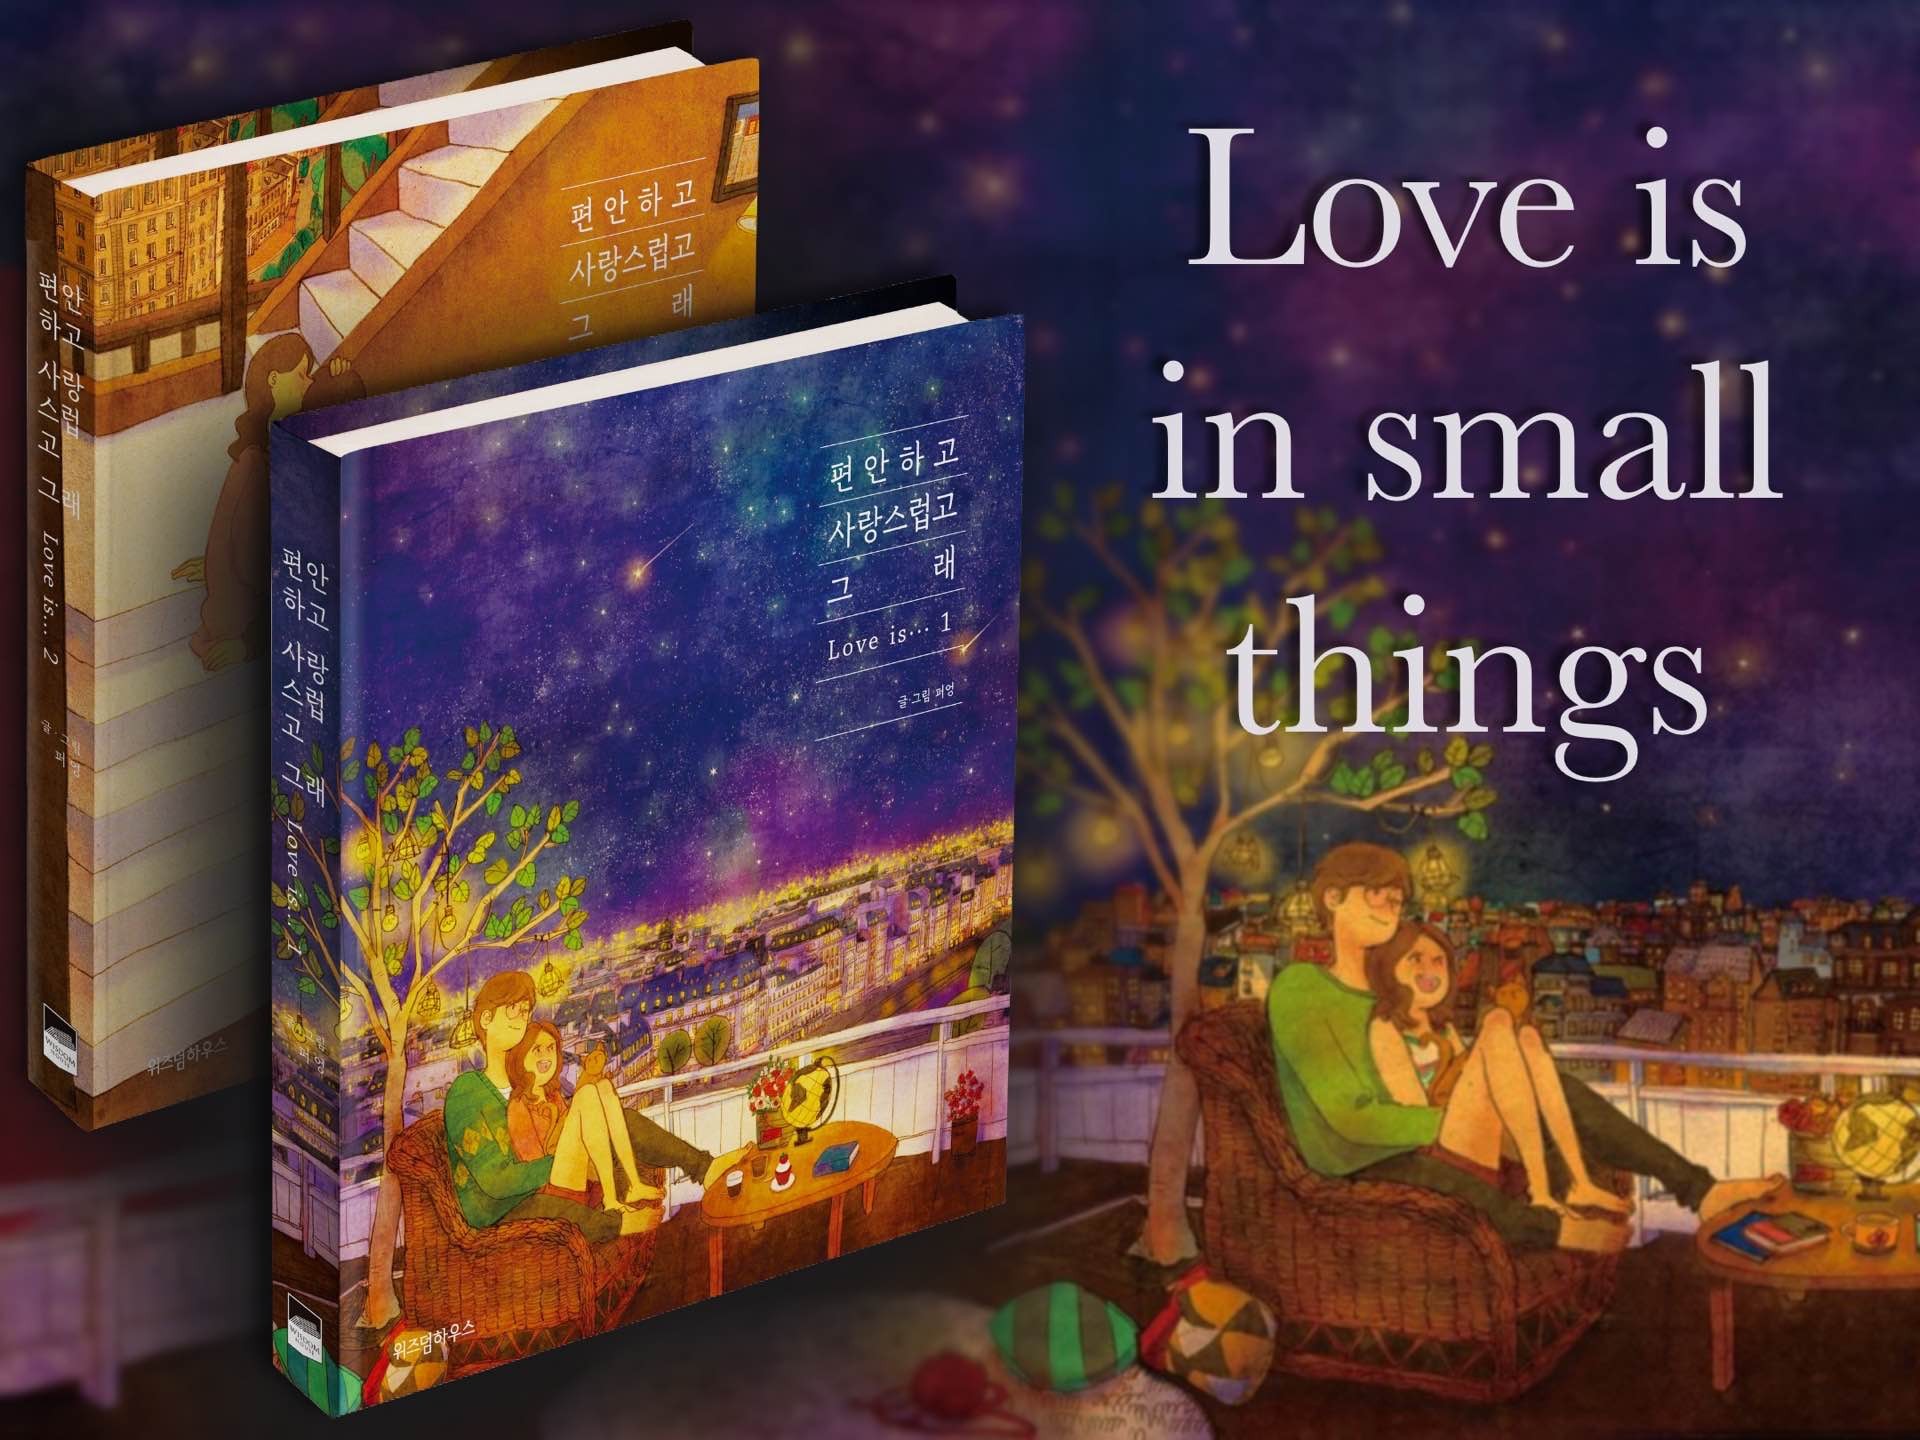 Love is in Small Things by Puuung. (two $24 hardcover editions)